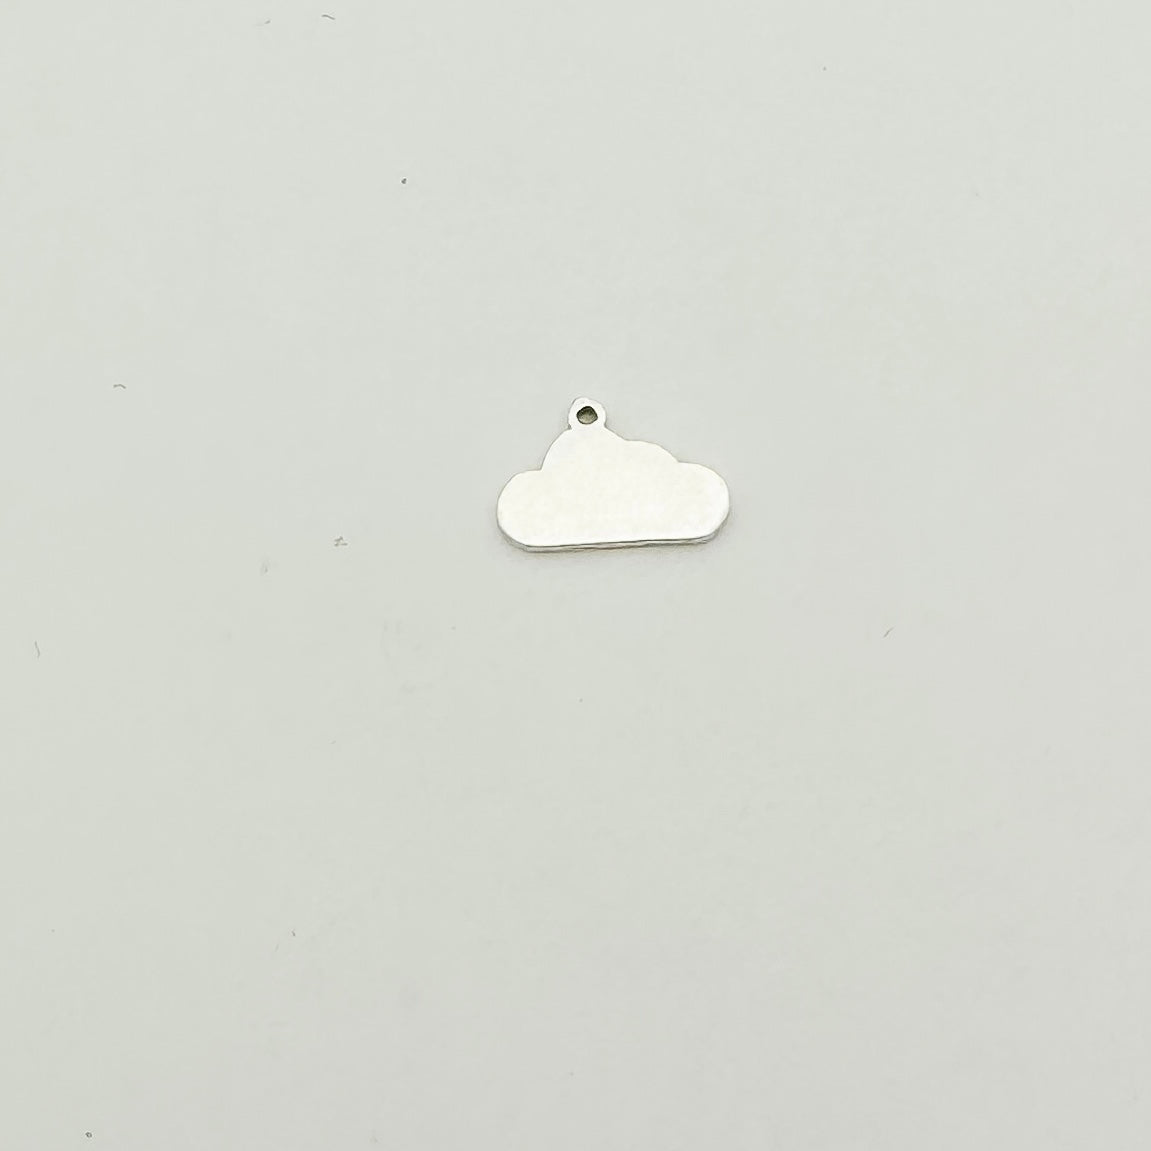 gold filled cloud connector, gold filled connectors, permanent jewelry connectors, essbe jewelry supply, permanent jewelry supplier, cloud charm, cloud connector, sterling silver cloud charm